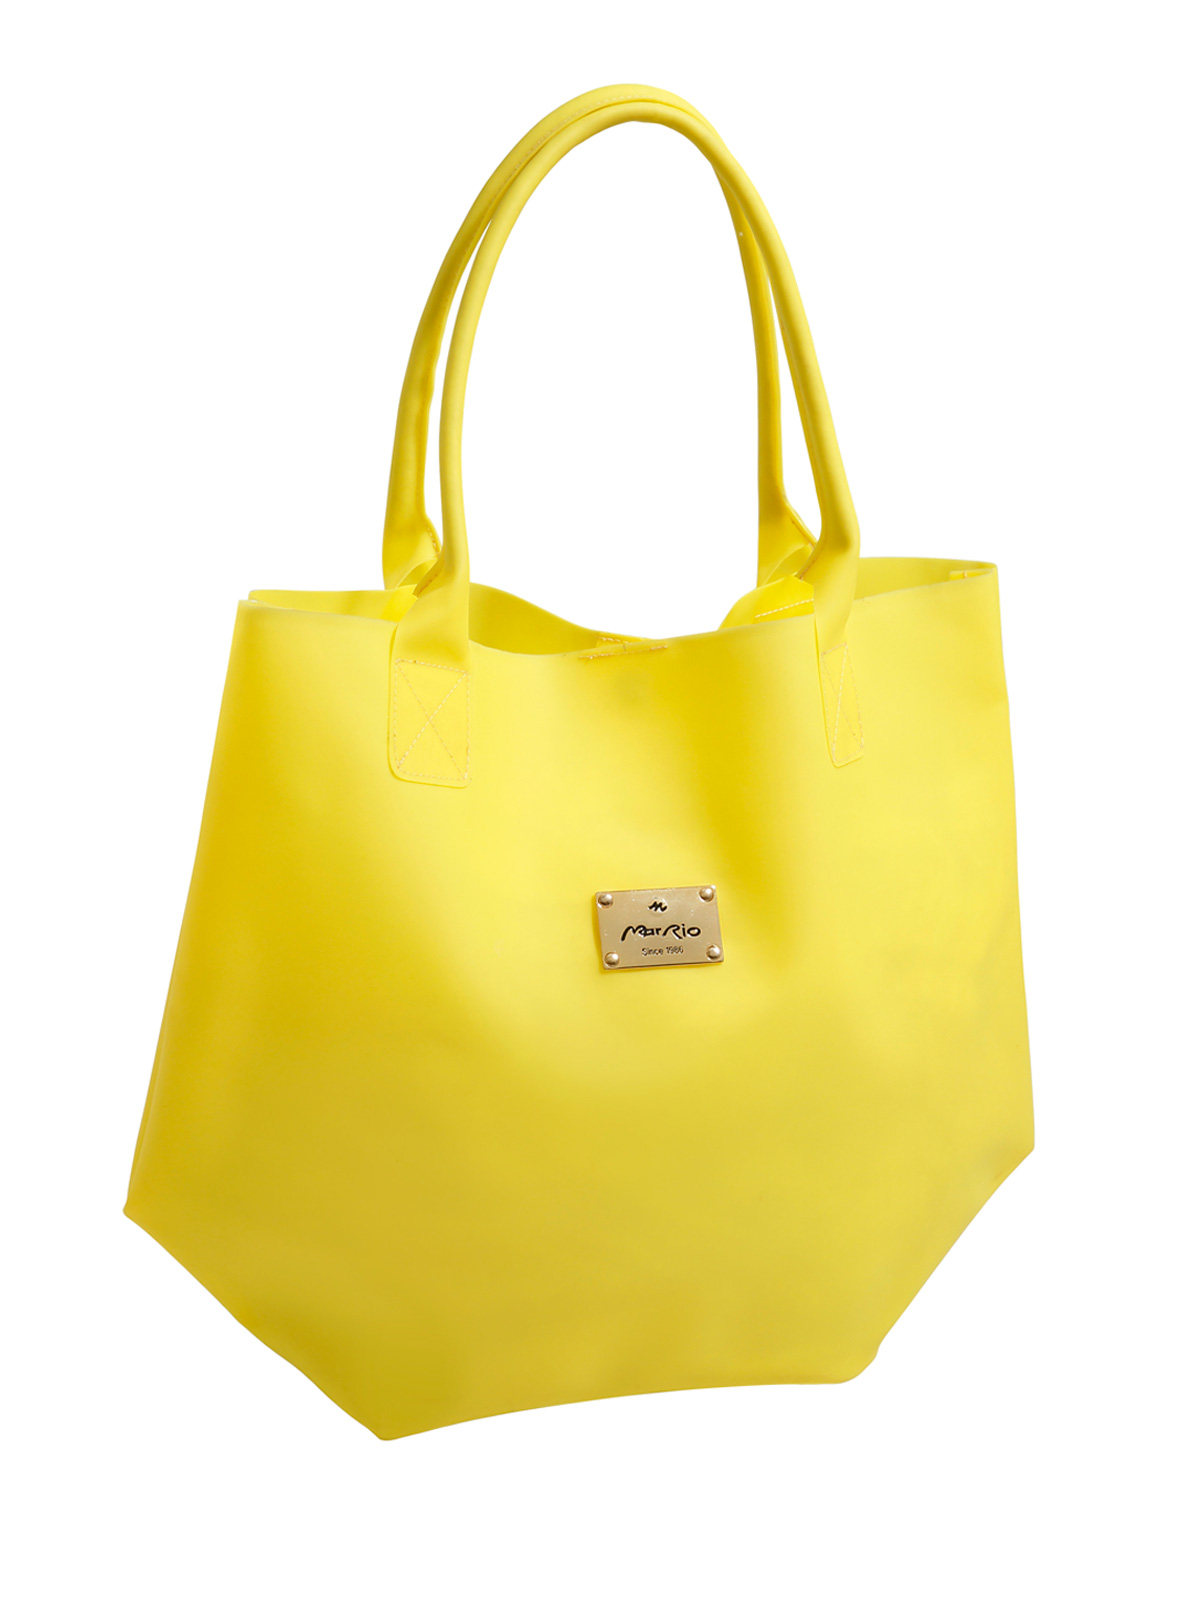 Plain Yellow Tote Bag In A Silicone Type Material - Easy Yellow